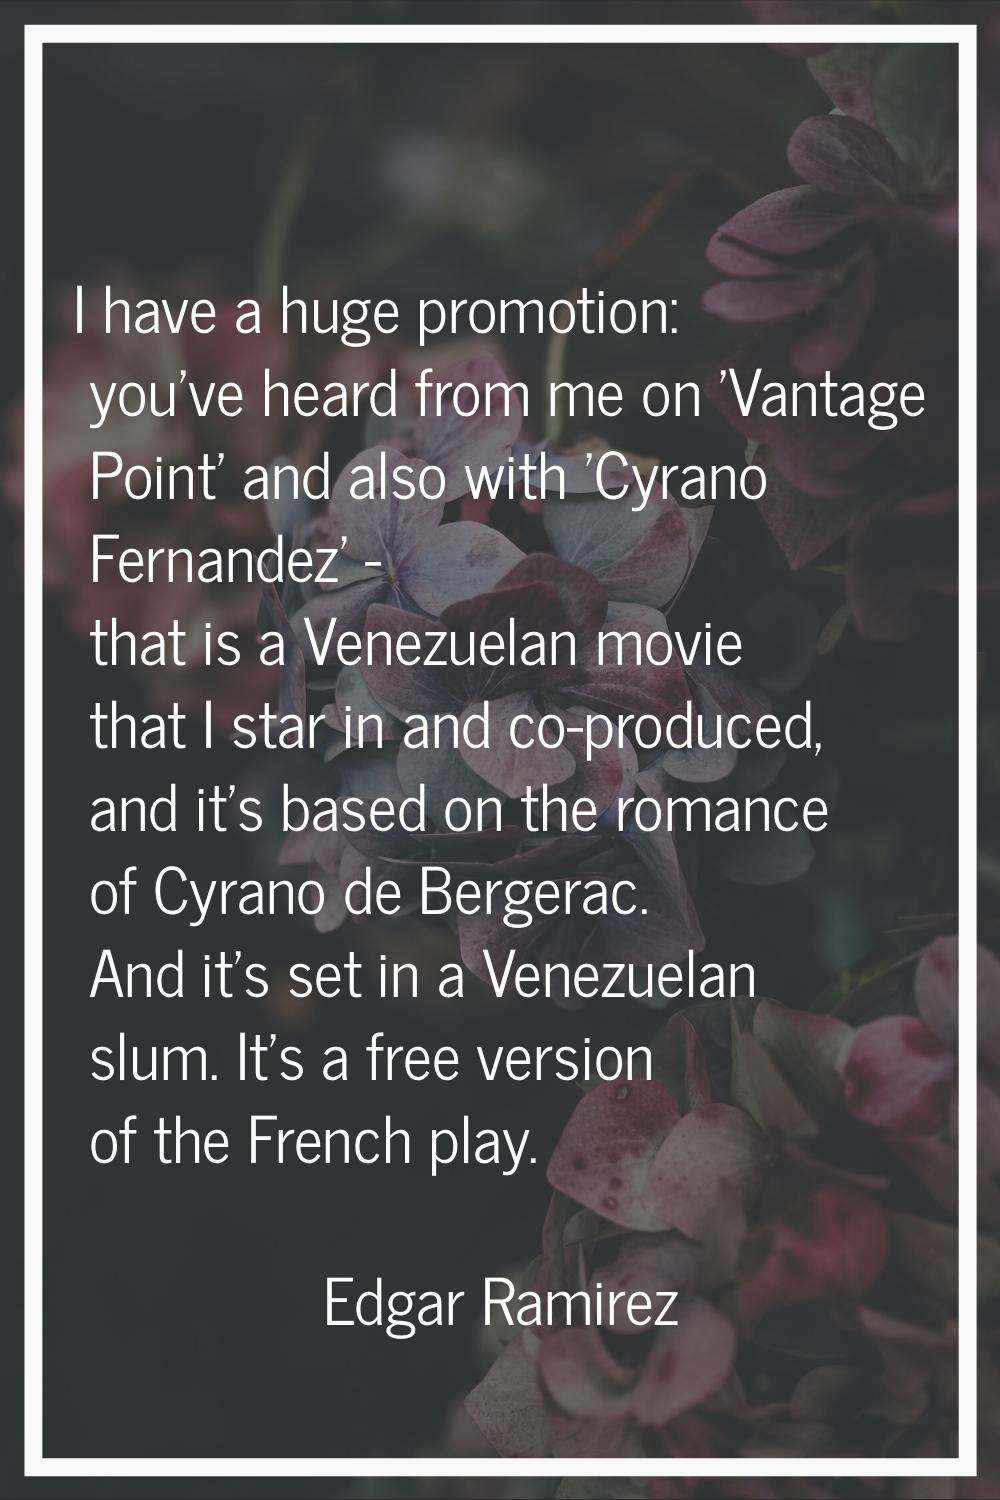 I have a huge promotion: you've heard from me on 'Vantage Point' and also with 'Cyrano Fernandez' -